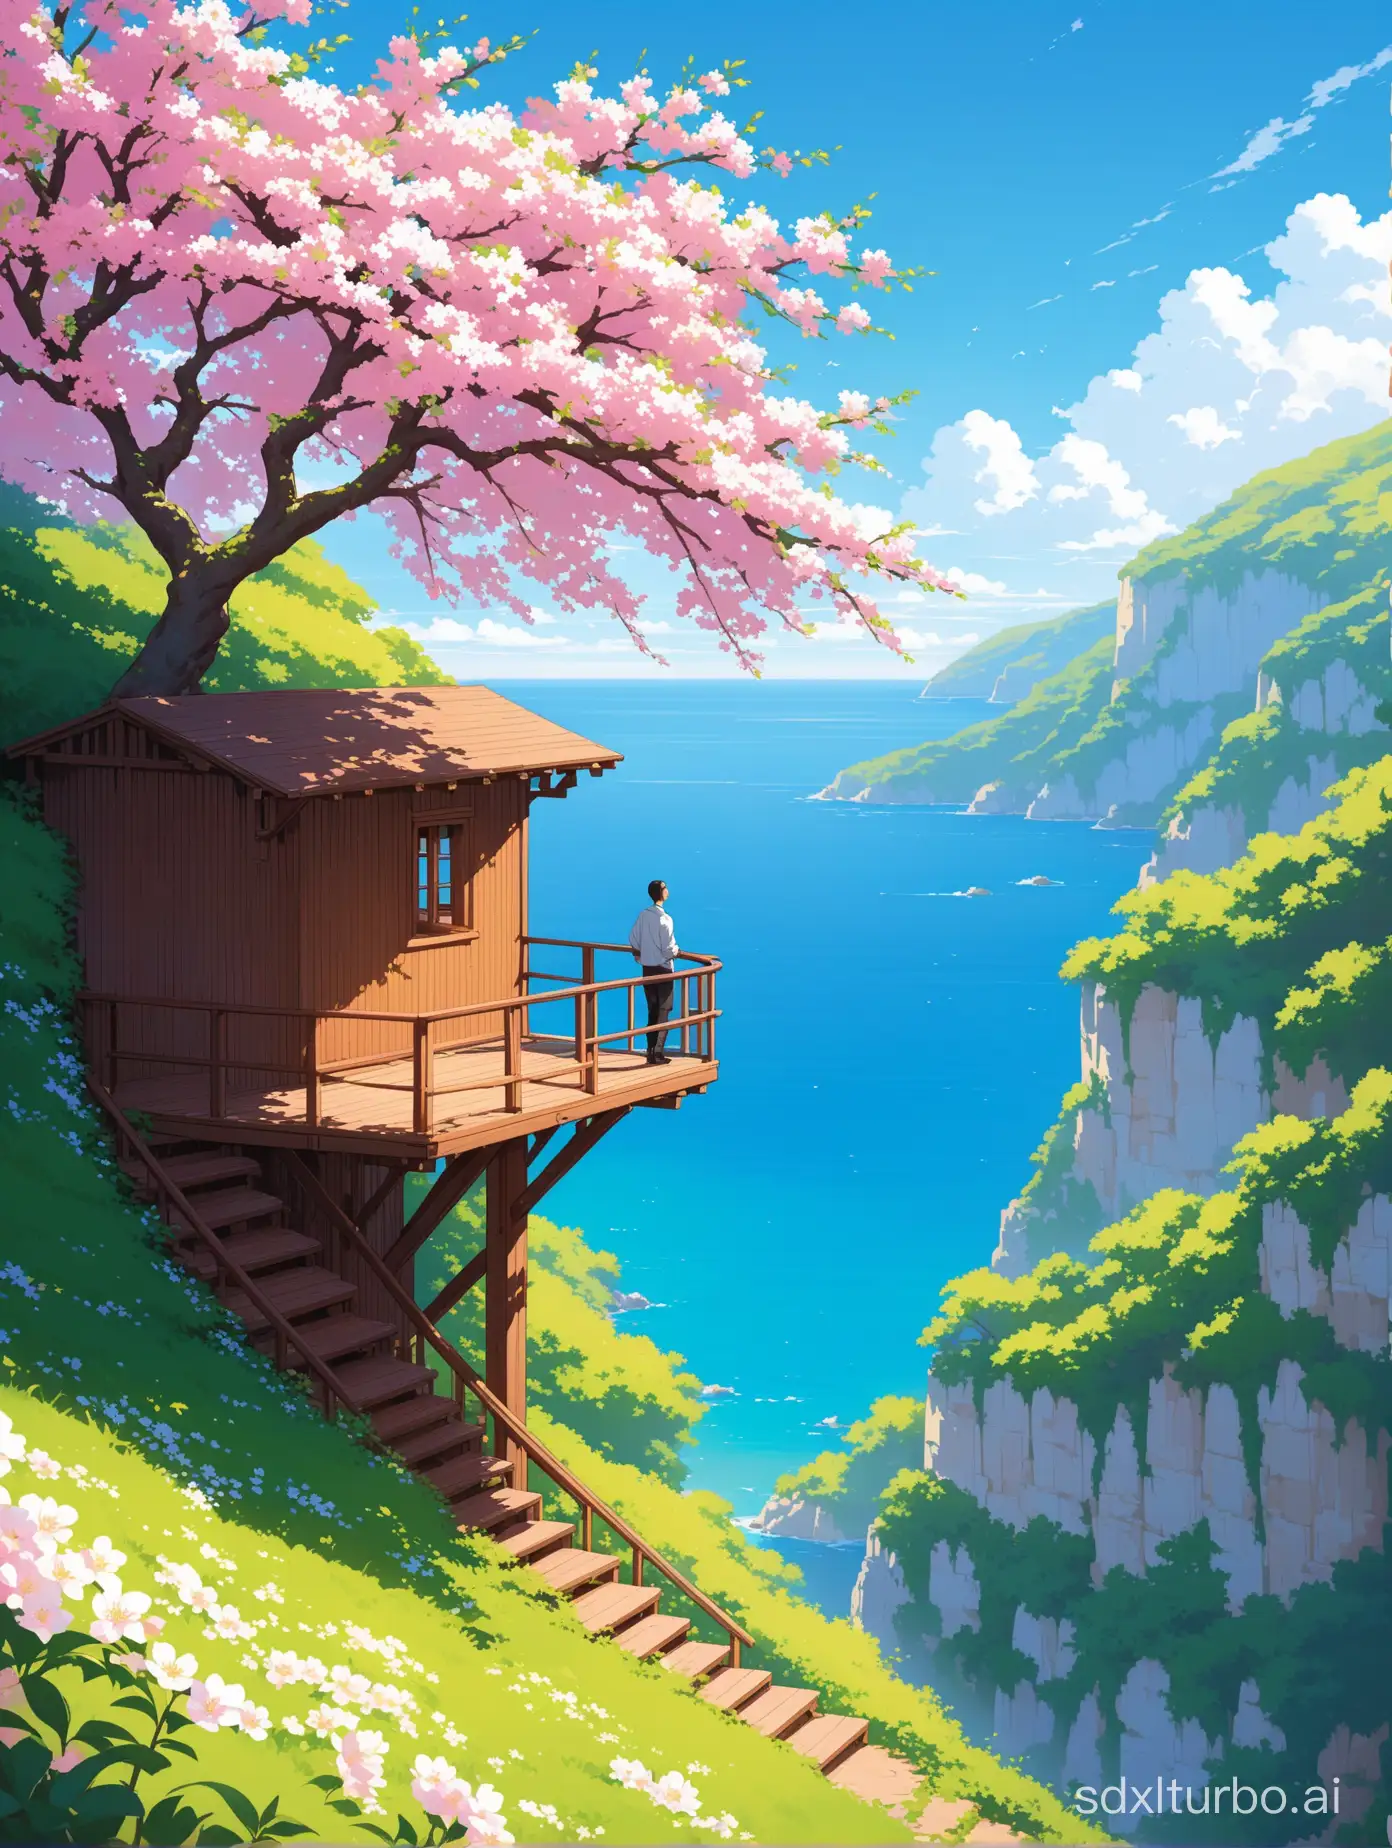 Tranquil-Cliffside-Oasis-with-Blossoming-Tree-and-Contemplative-Figure